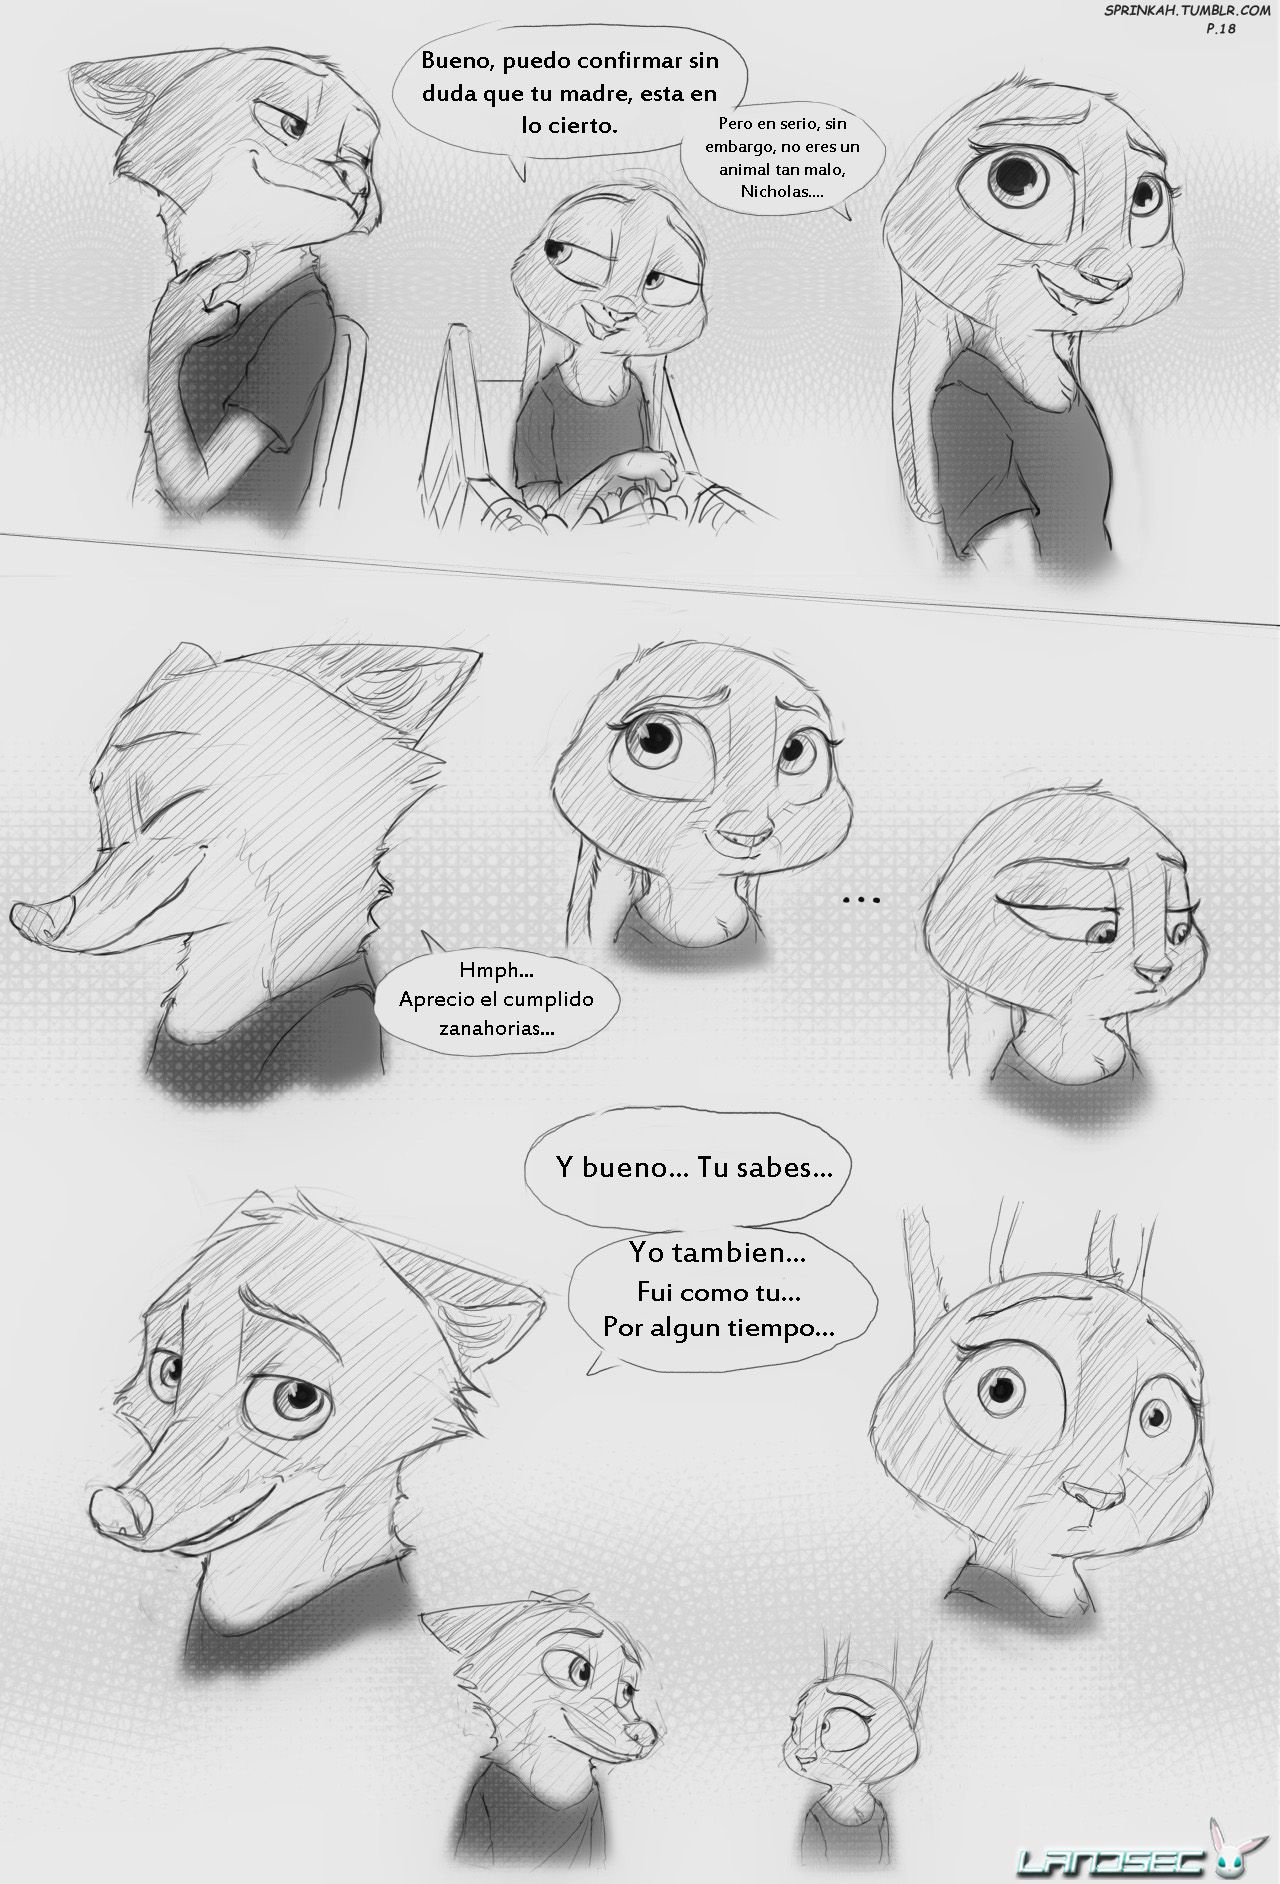 [Sprinkah] This is what true love looks like (Zootopia) (Spanish) (On Going) [Landsec] http://sprinkah.tumblr.com/ 29